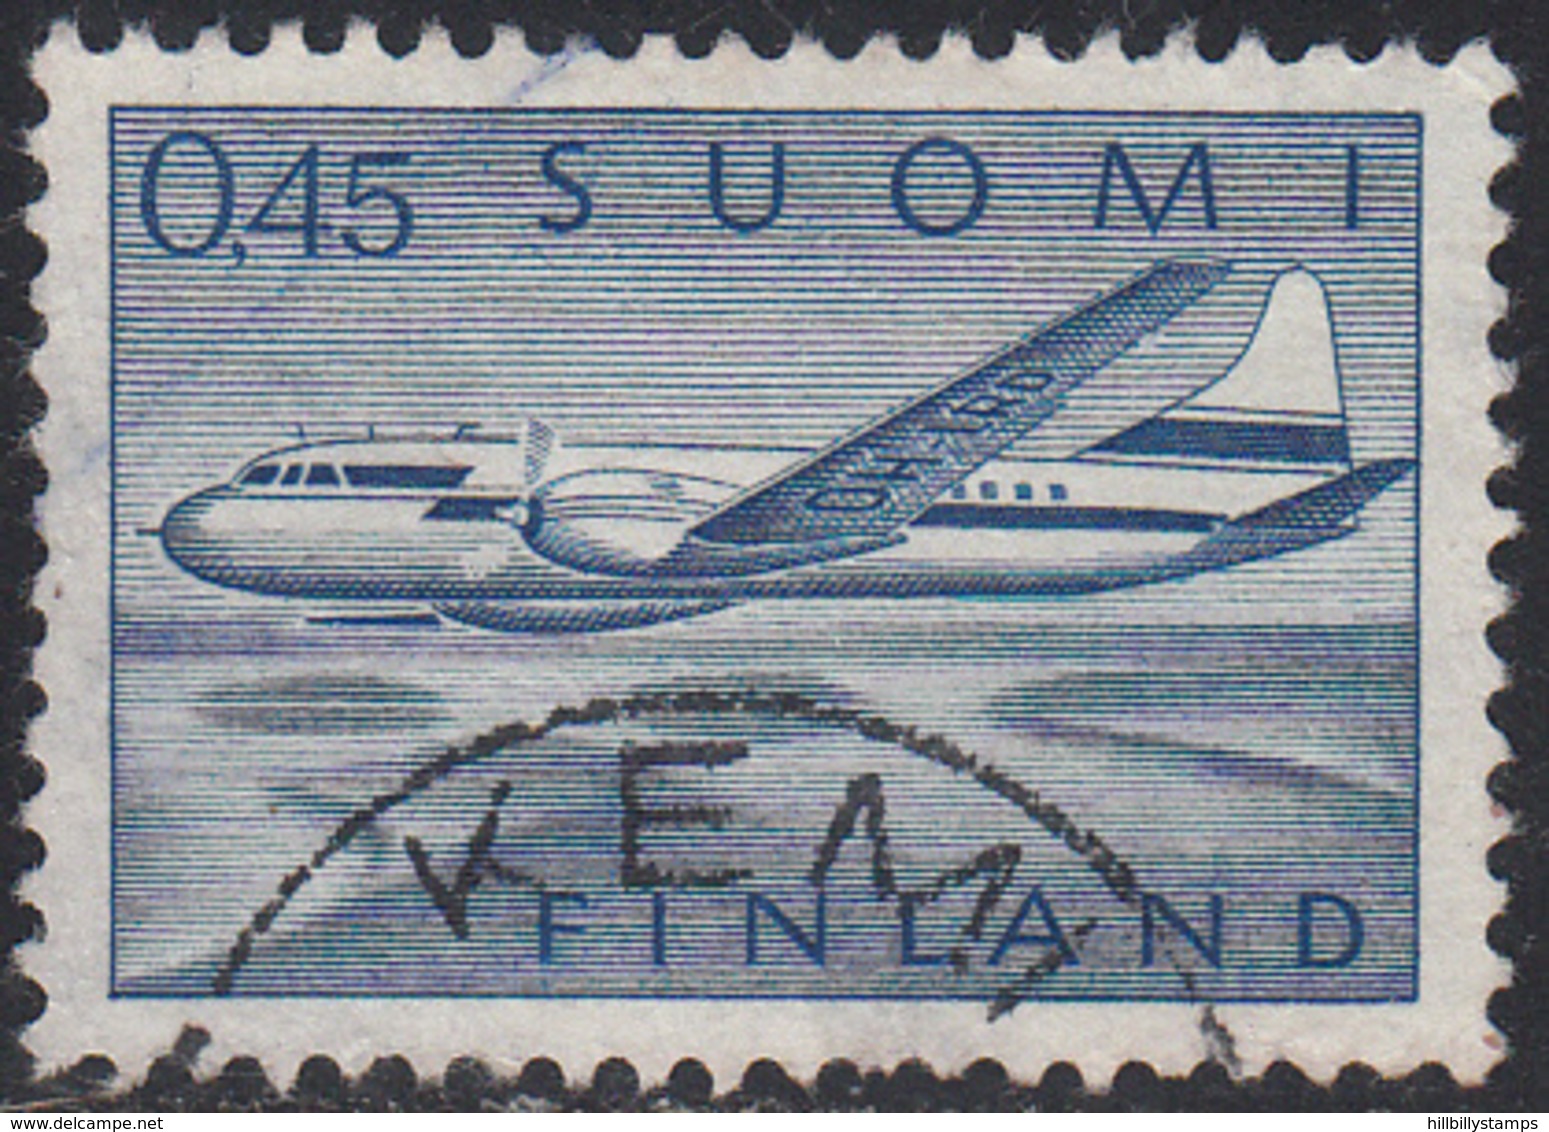 FINLAND     SCOTT NO  C8   USED     YEAR  1963 - Used Stamps